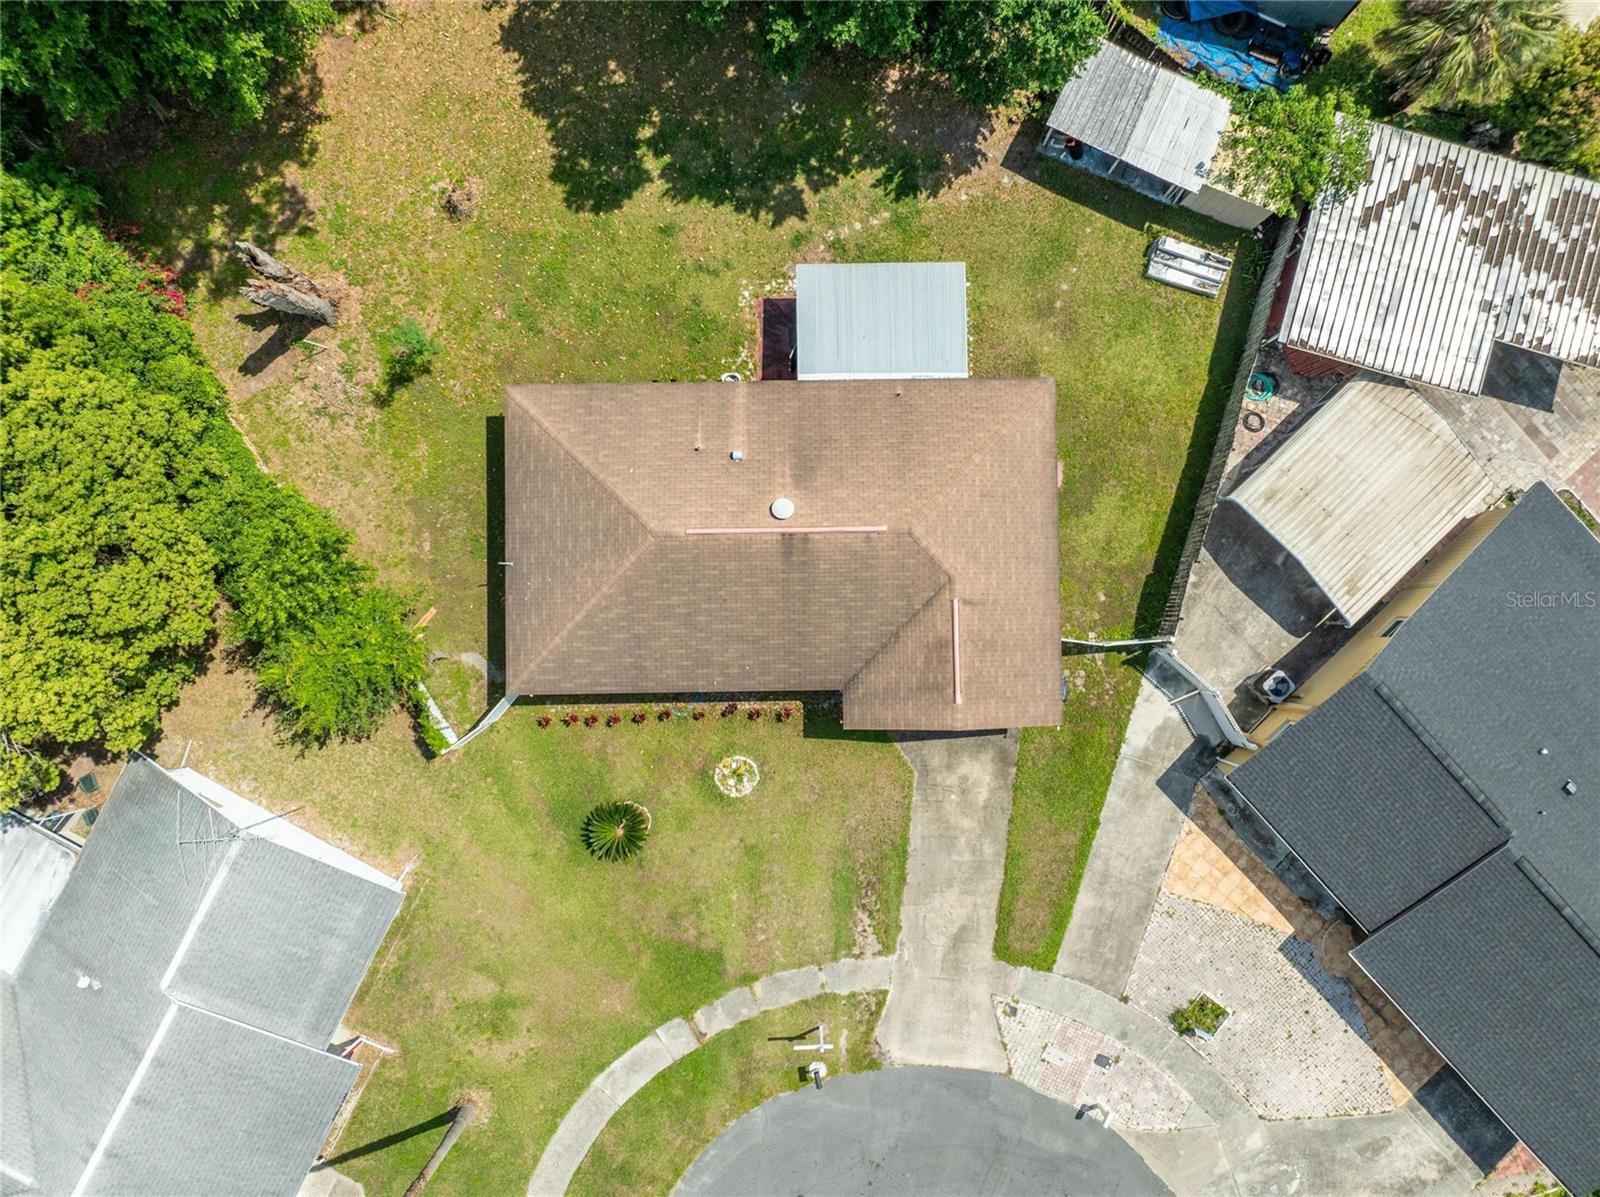 Aerial View of home on a cul-de-sac